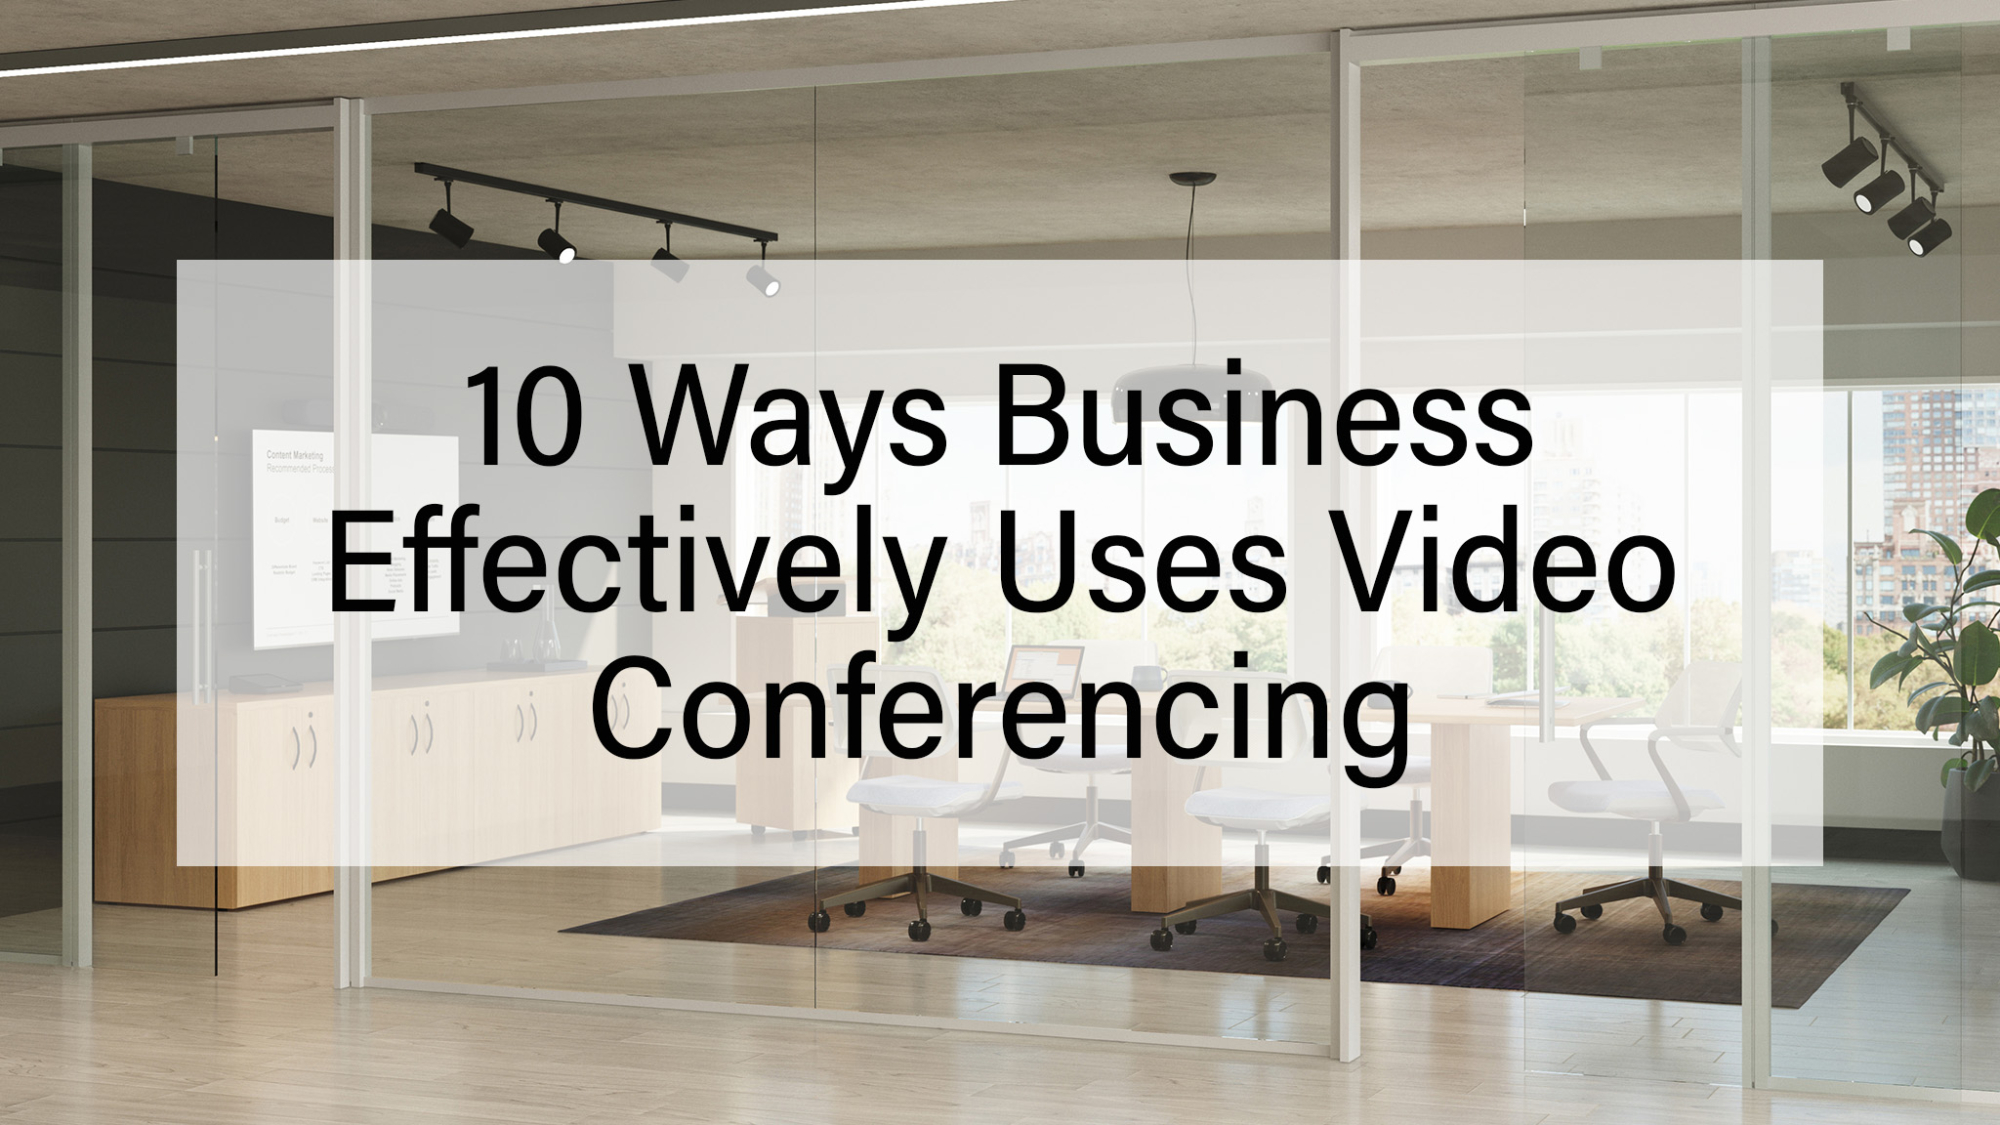 10 ways business effectively uses video conferencing